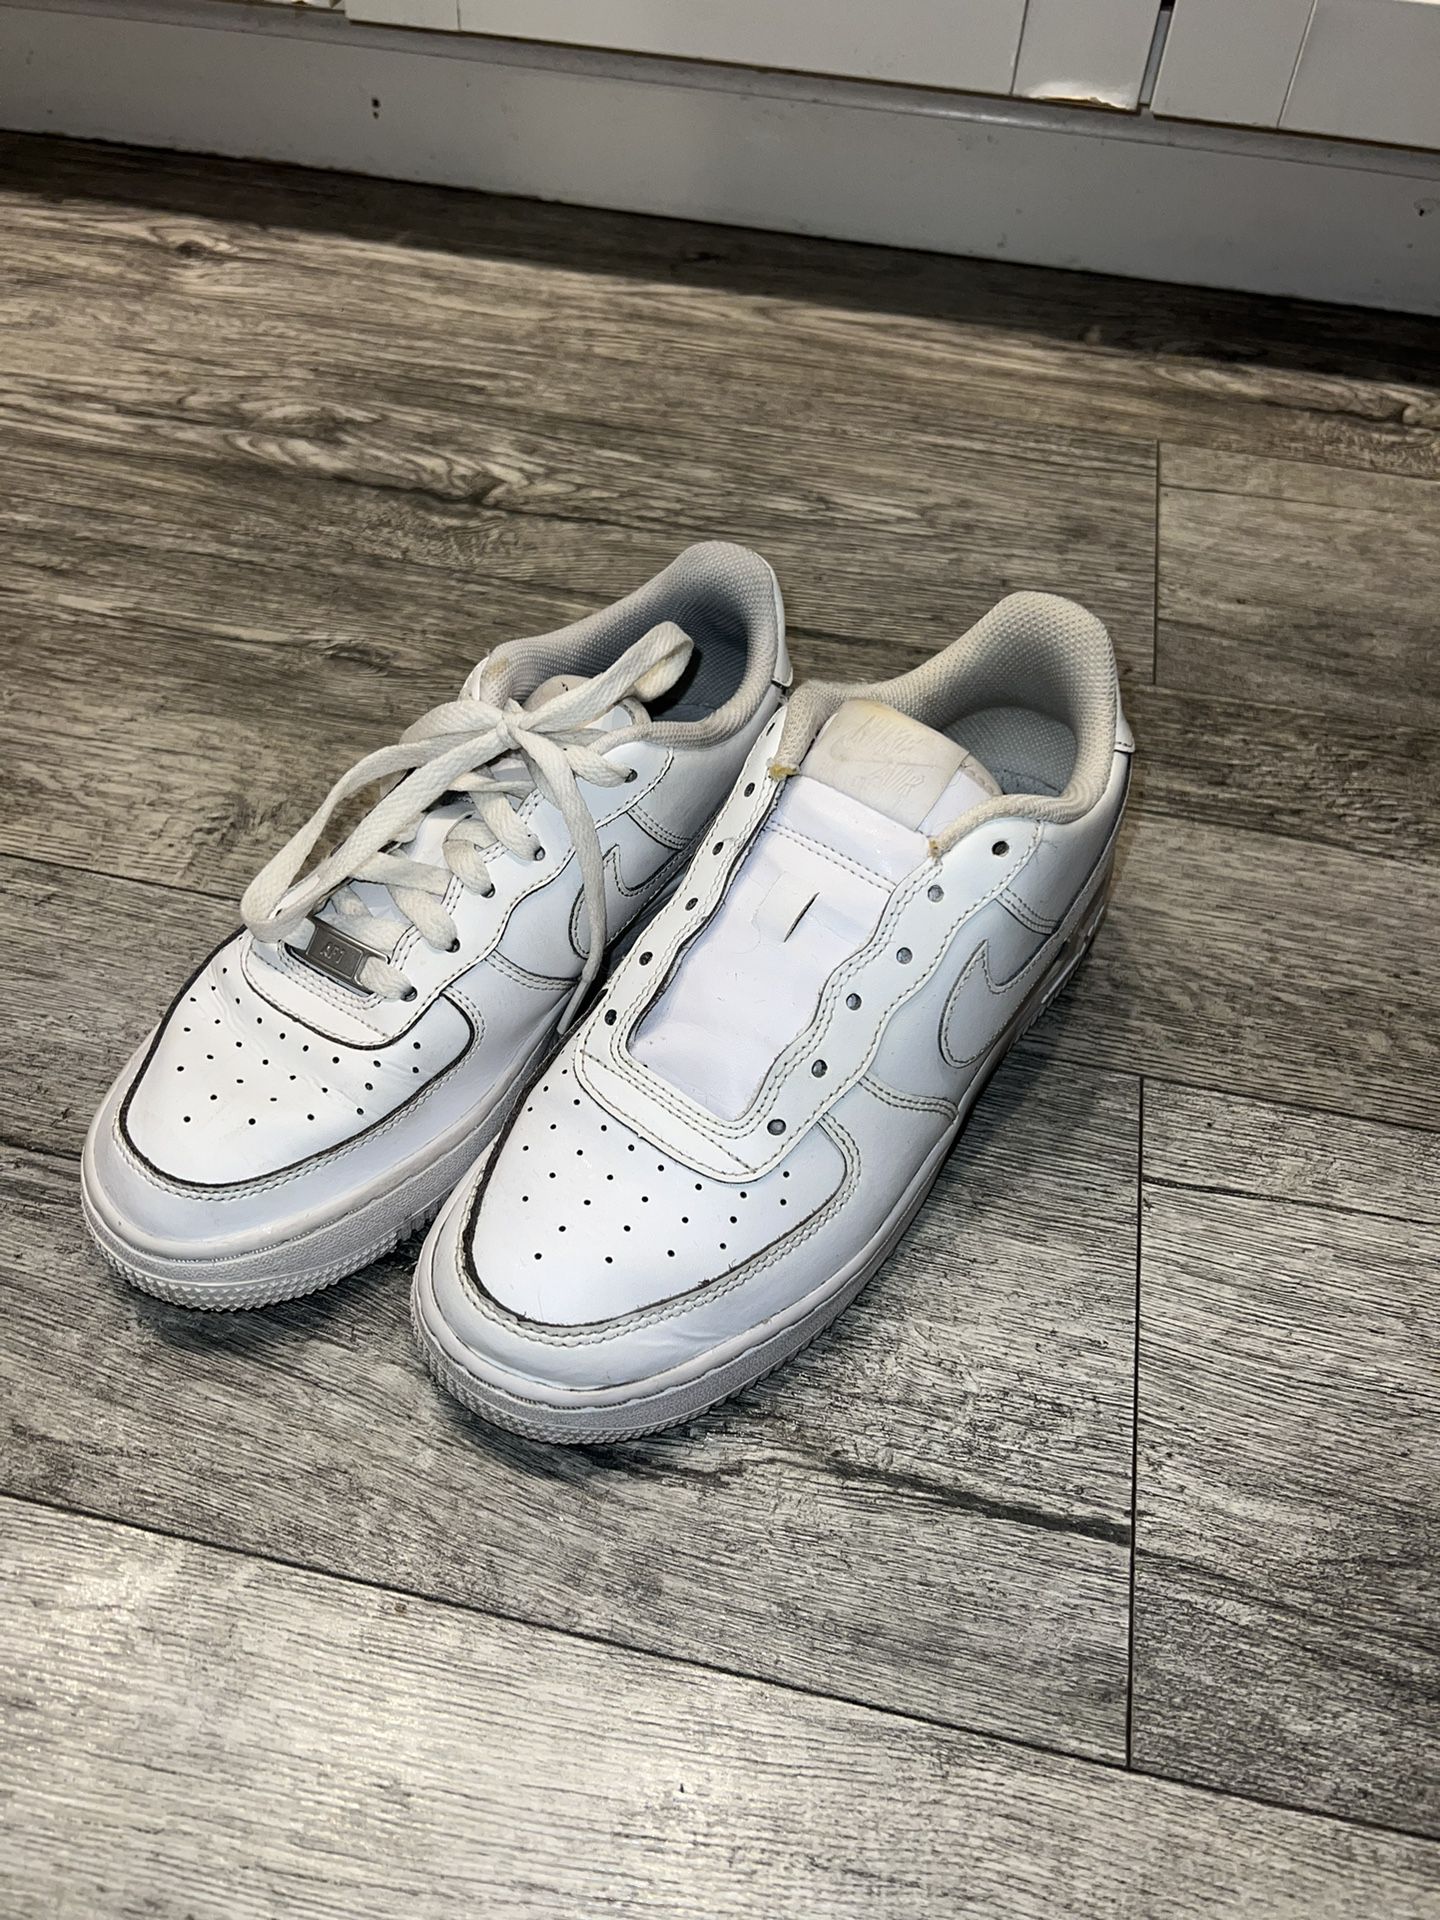 6y Air Force One Used As Is $20